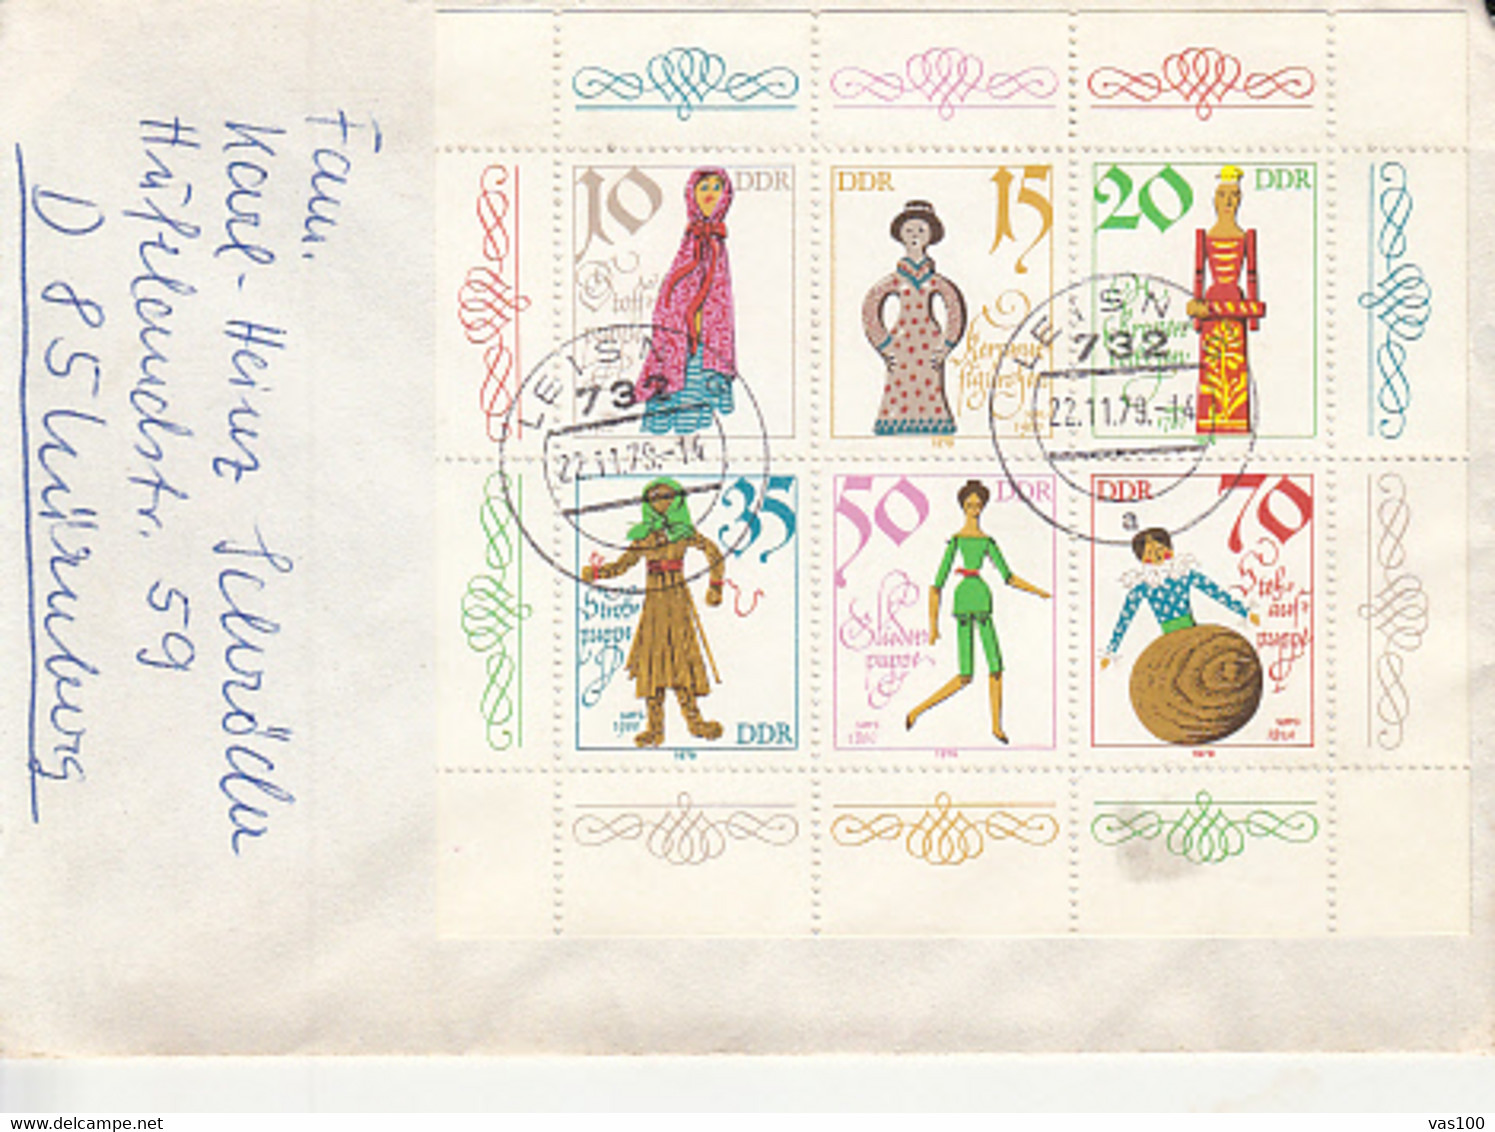 CHILDRENS, PUPPETS, STAMPS ON COVER, 1979, GERMANY - Marionette